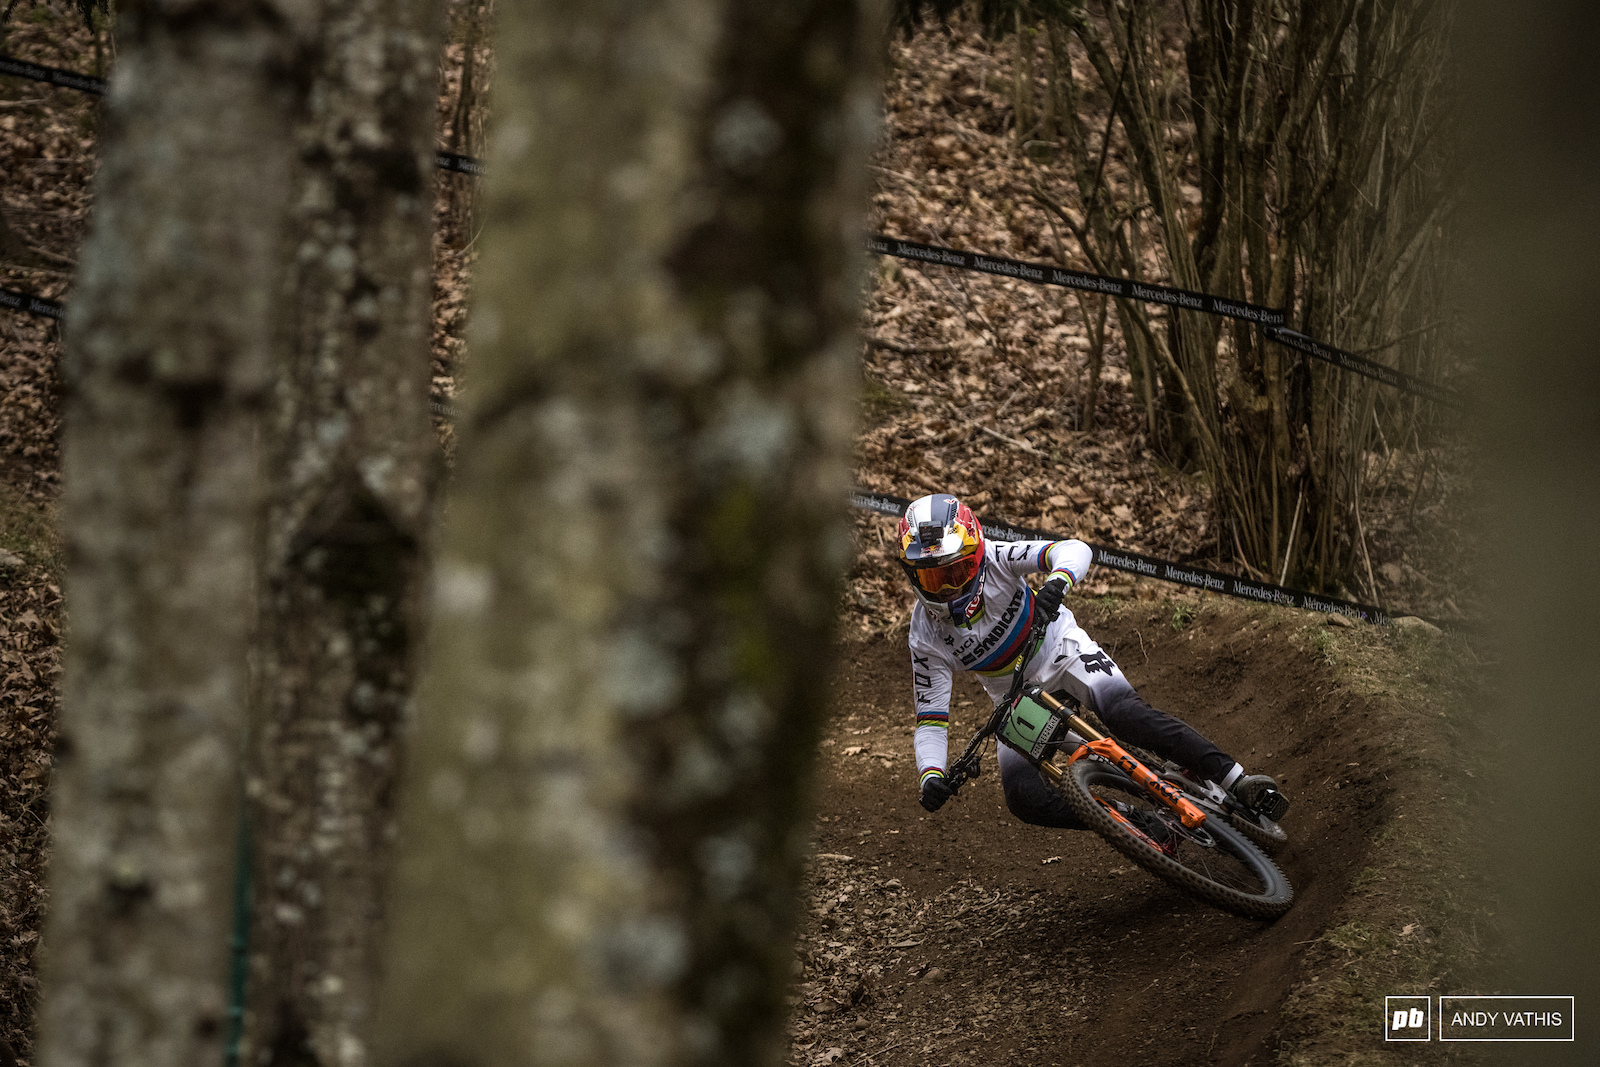 Jackson Goldstone weaving his way through the lower forest stripes and all. He ll be the one to catch this season.